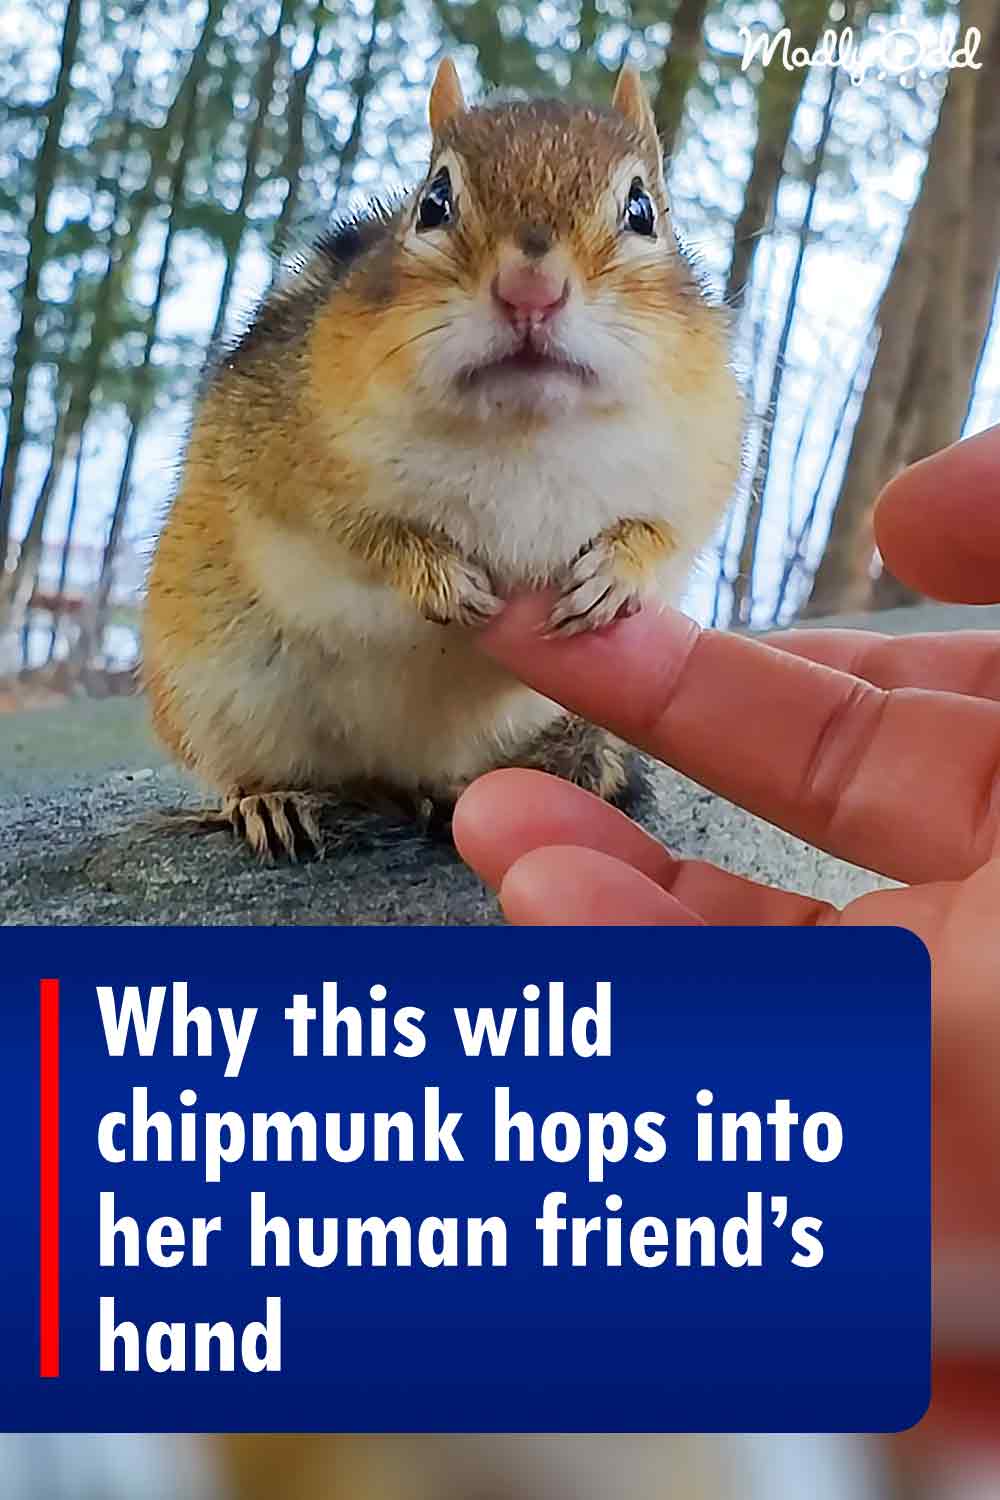 Why this wild chipmunk hops into her human friend’s hand